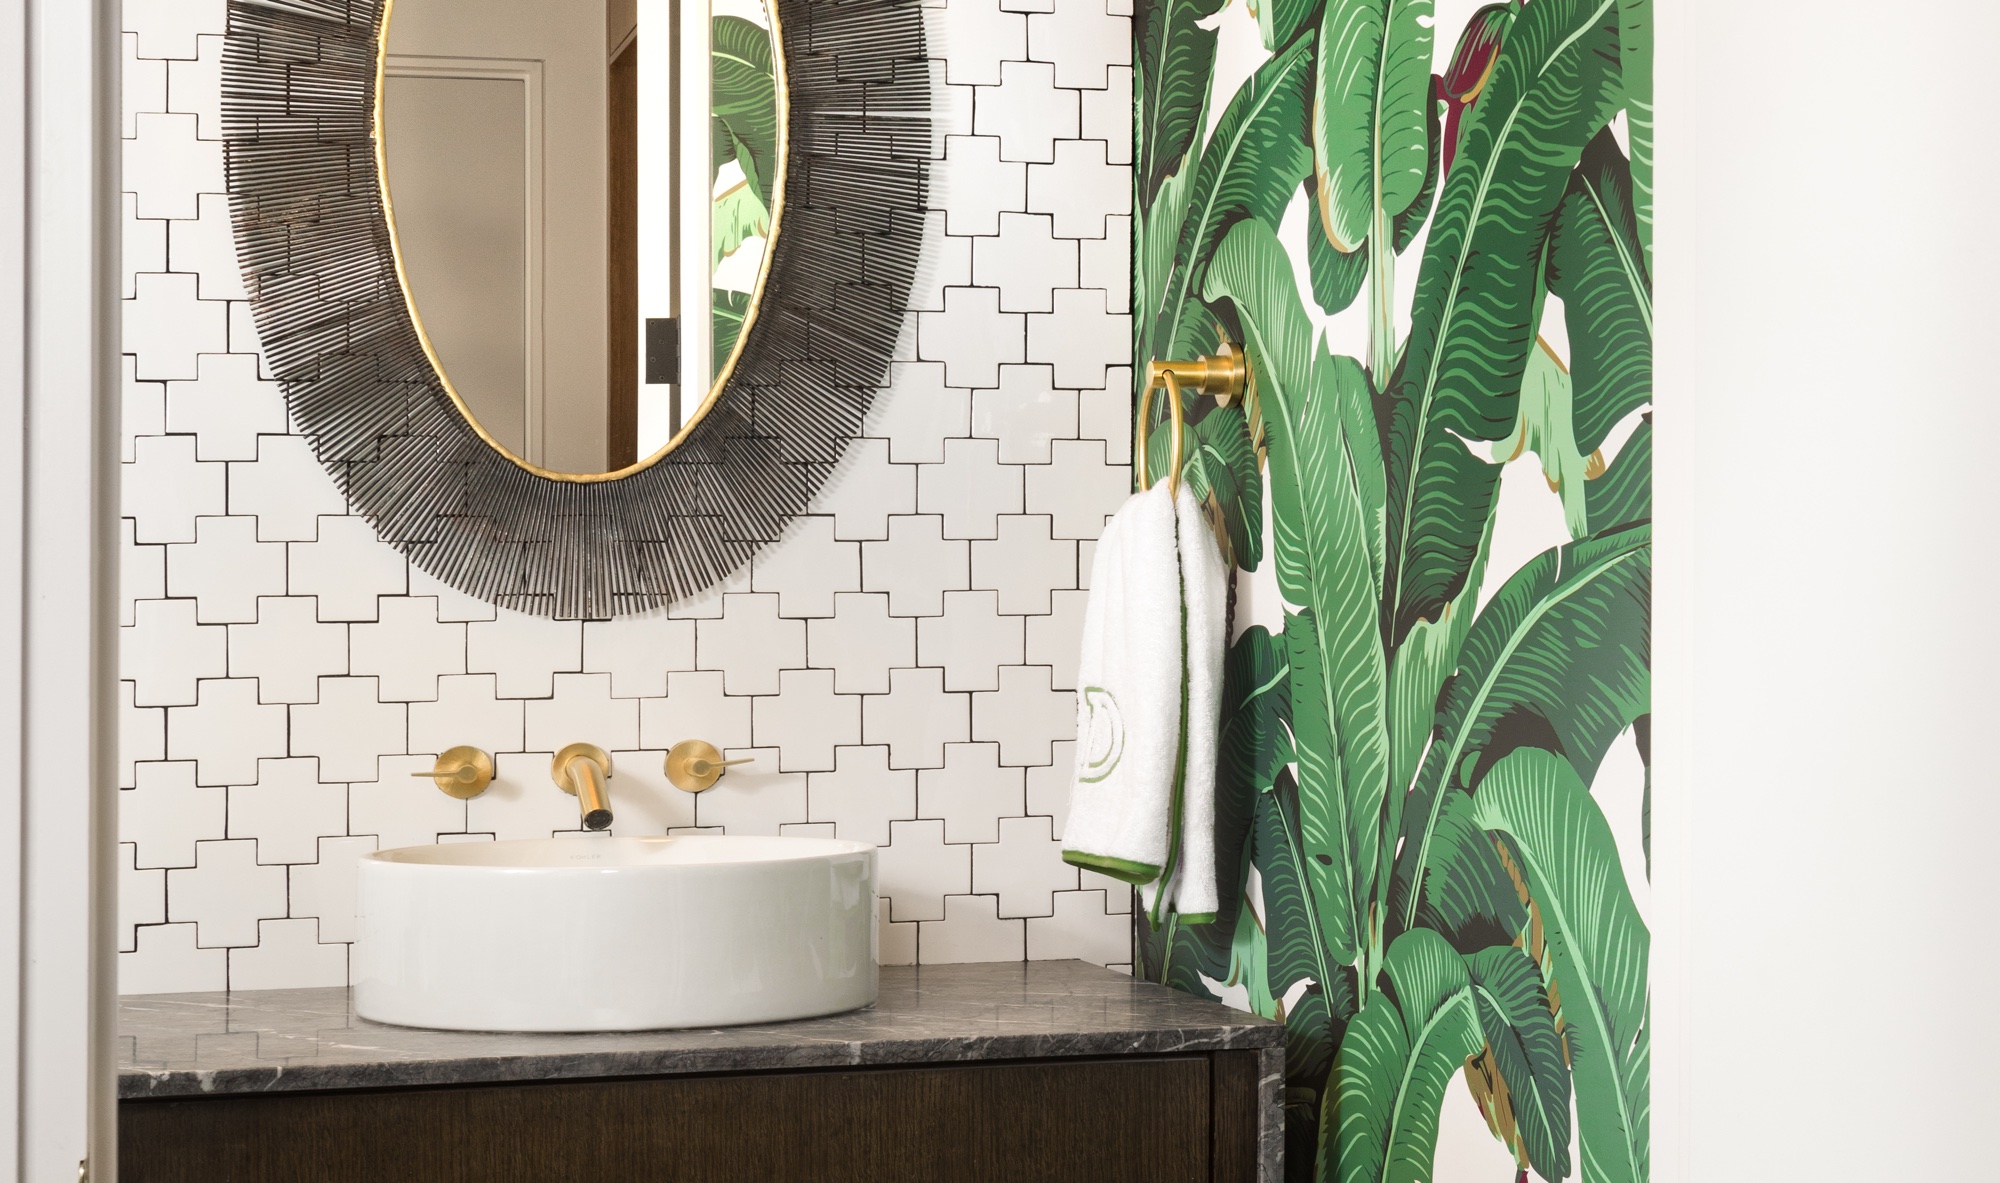 Powder Room Ideas – 10 Ways To Create A Small Space That'S Big On Style |  Livingetc